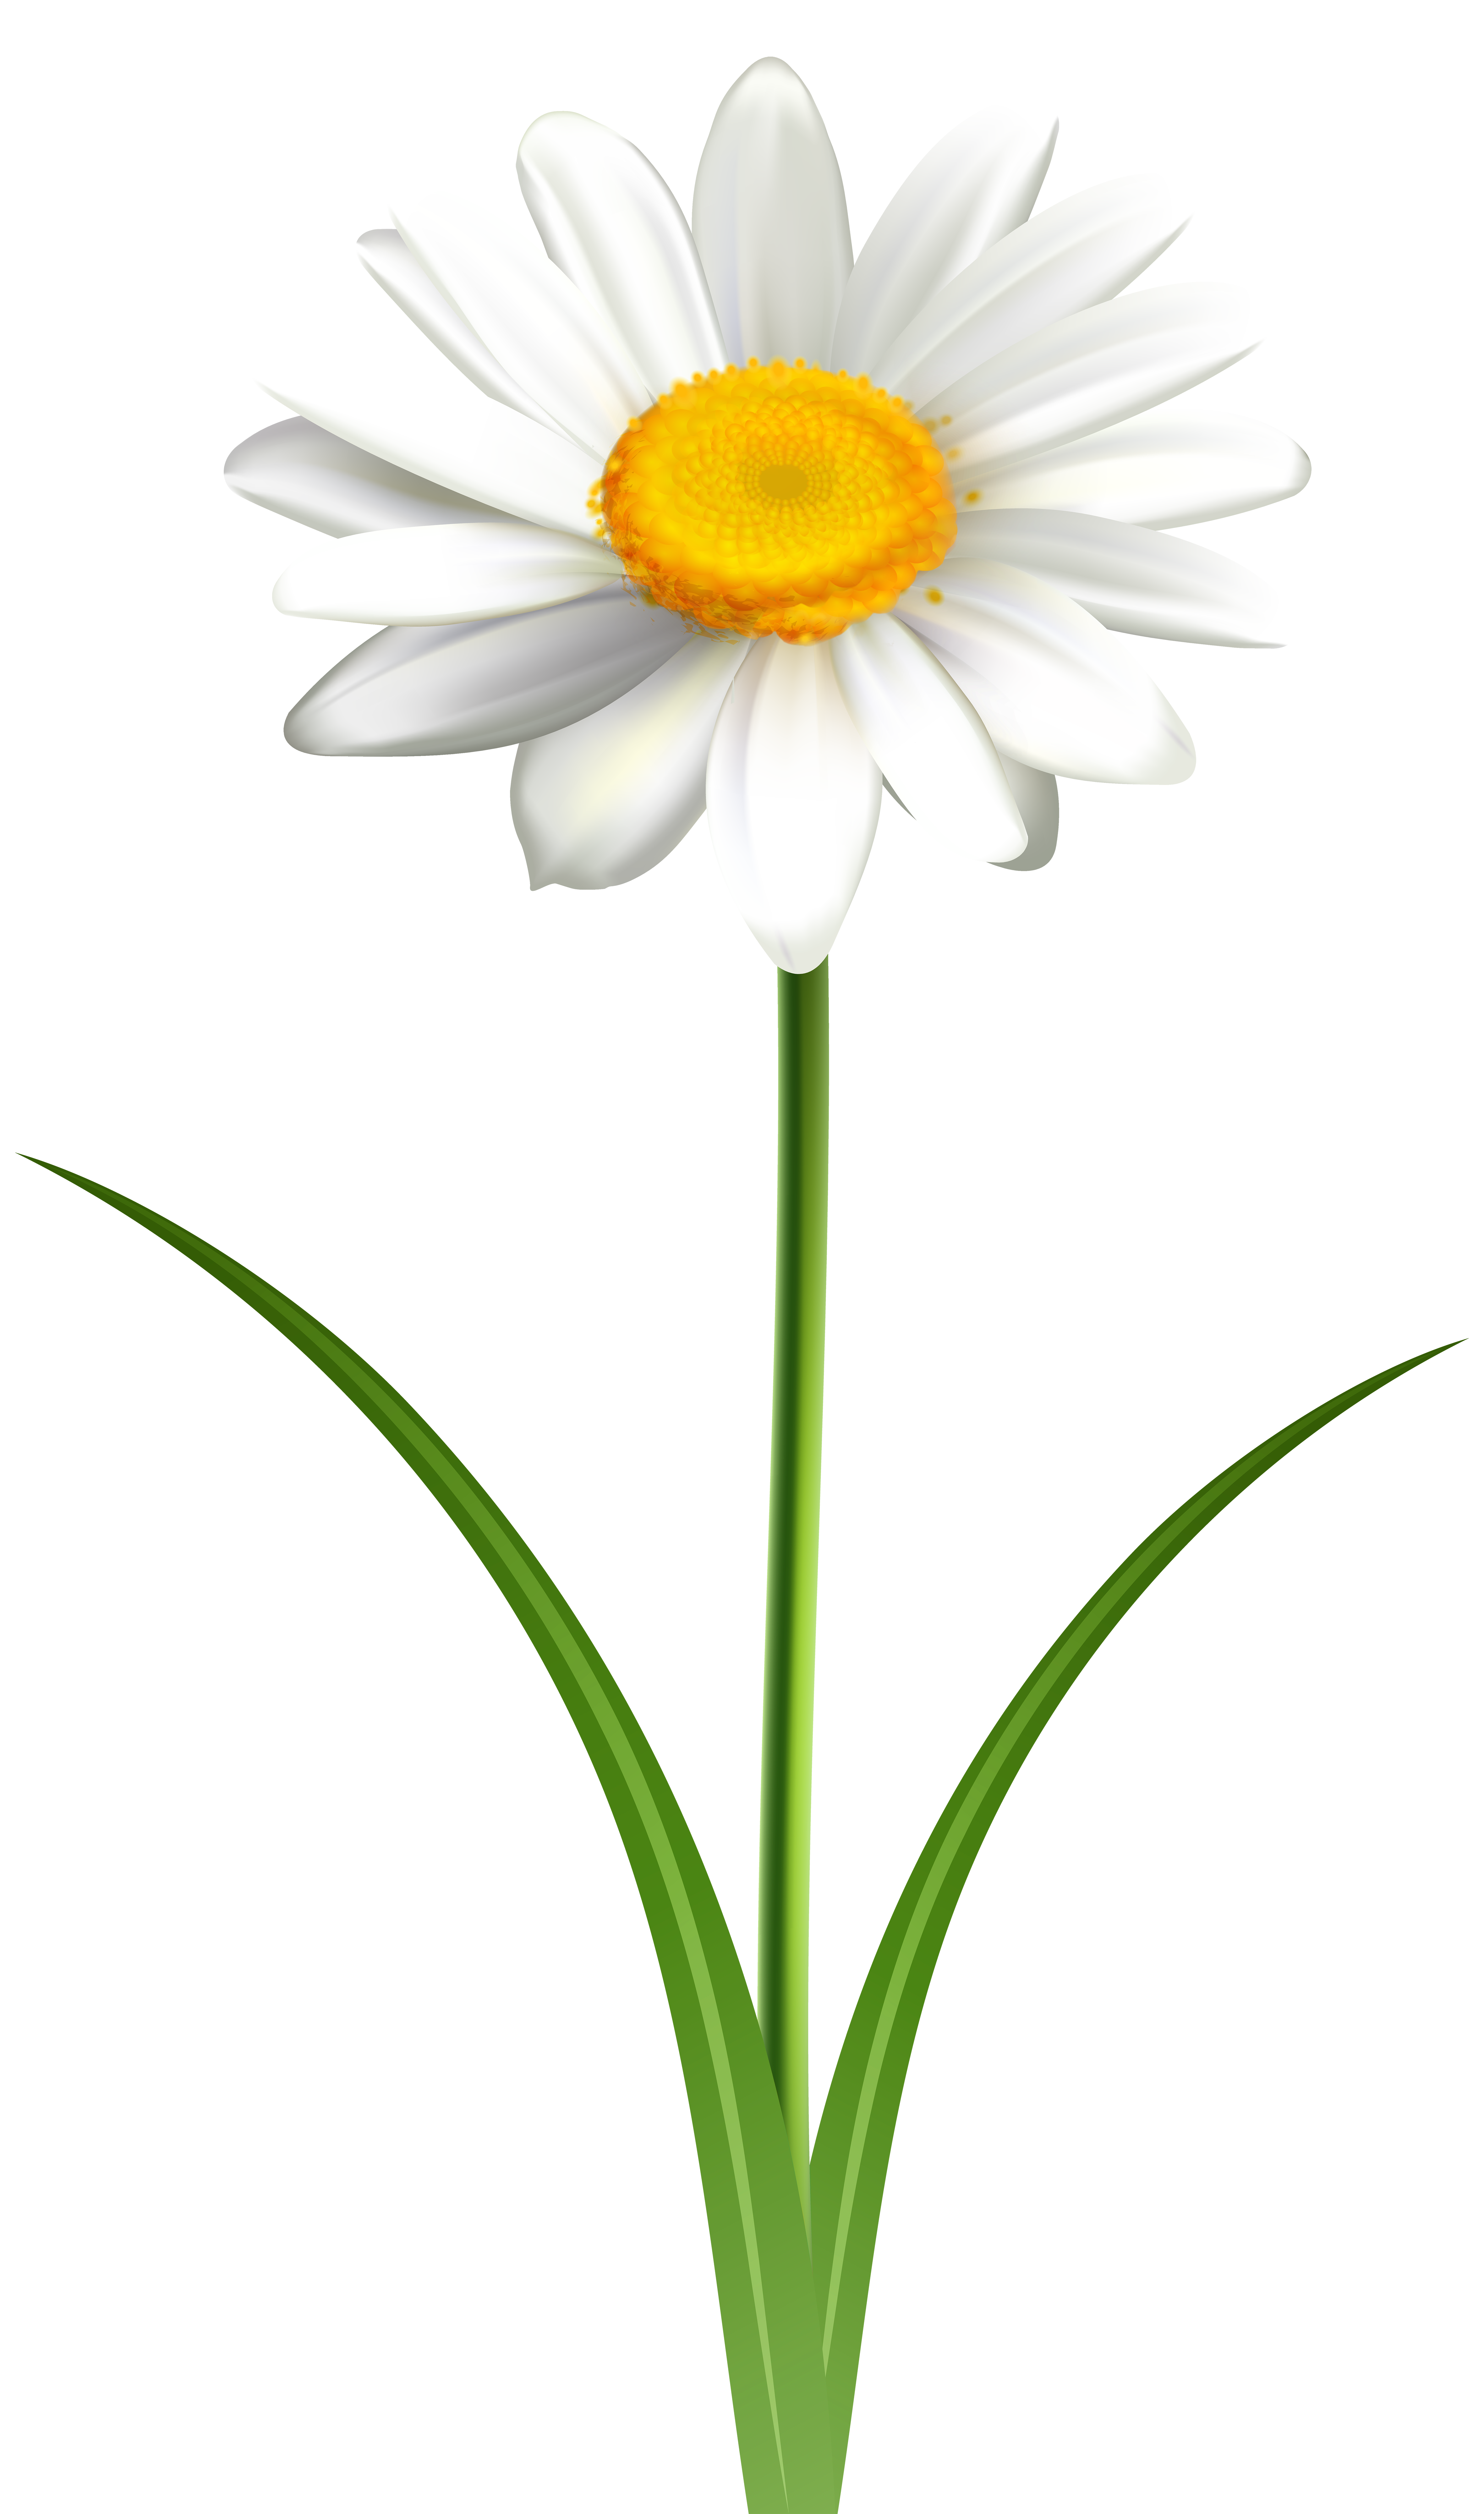 Daisies clipart flowr, Daisies flowr Transparent FREE for download on